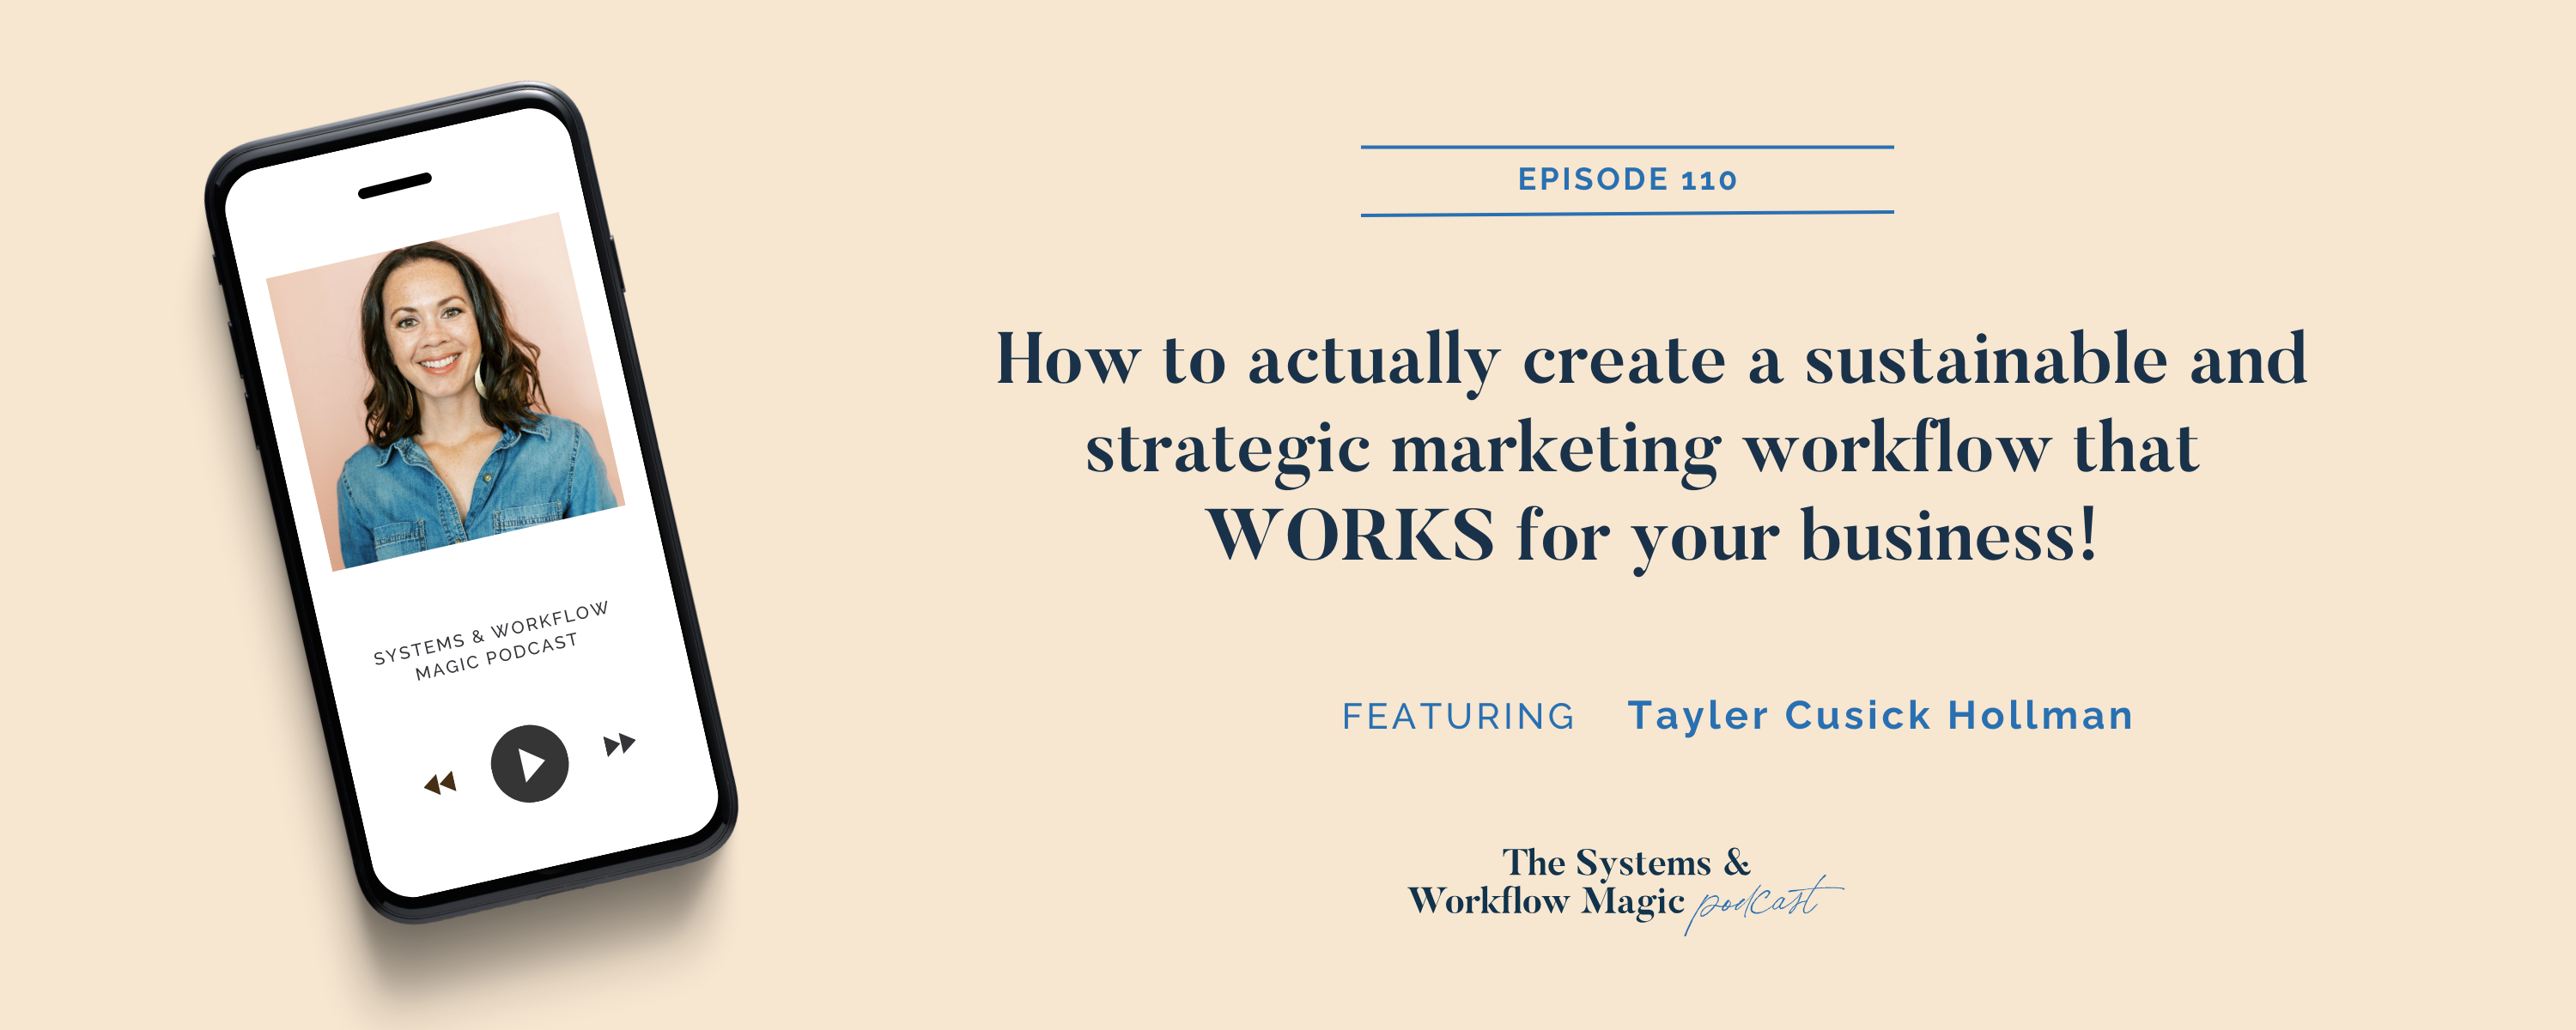 podcast_episode_banner_featuring_tayler_cusick_hollman_on_the_systems_and_workflow_magic_podcast_episode_110